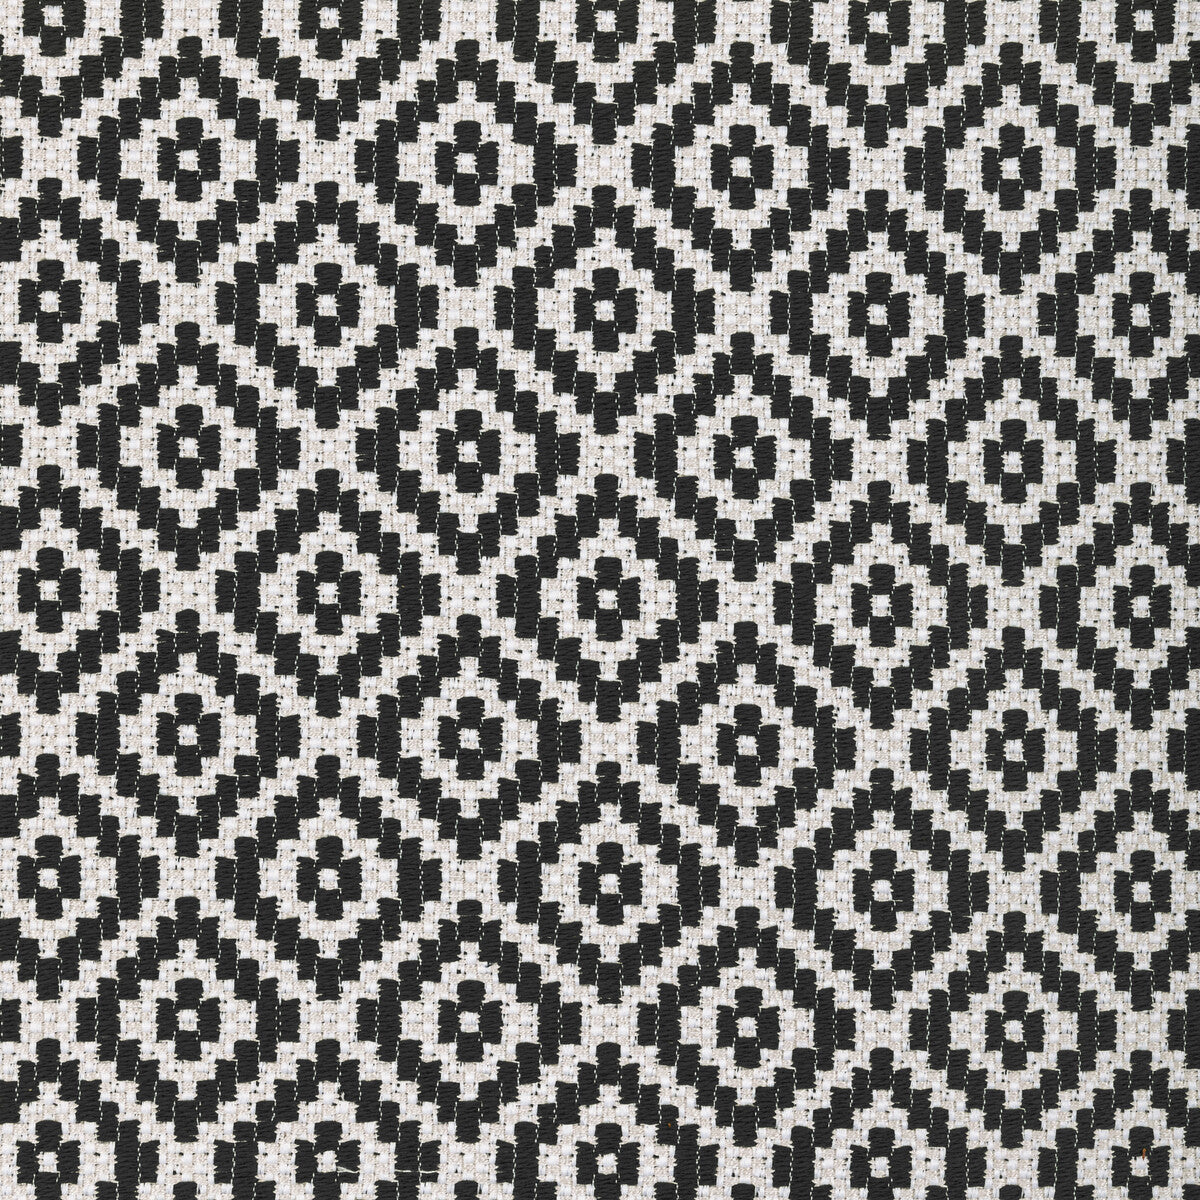 Kravet Design fabric in 36411-8 color - pattern 36411.8.0 - by Kravet Design in the Performance Crypton Home collection